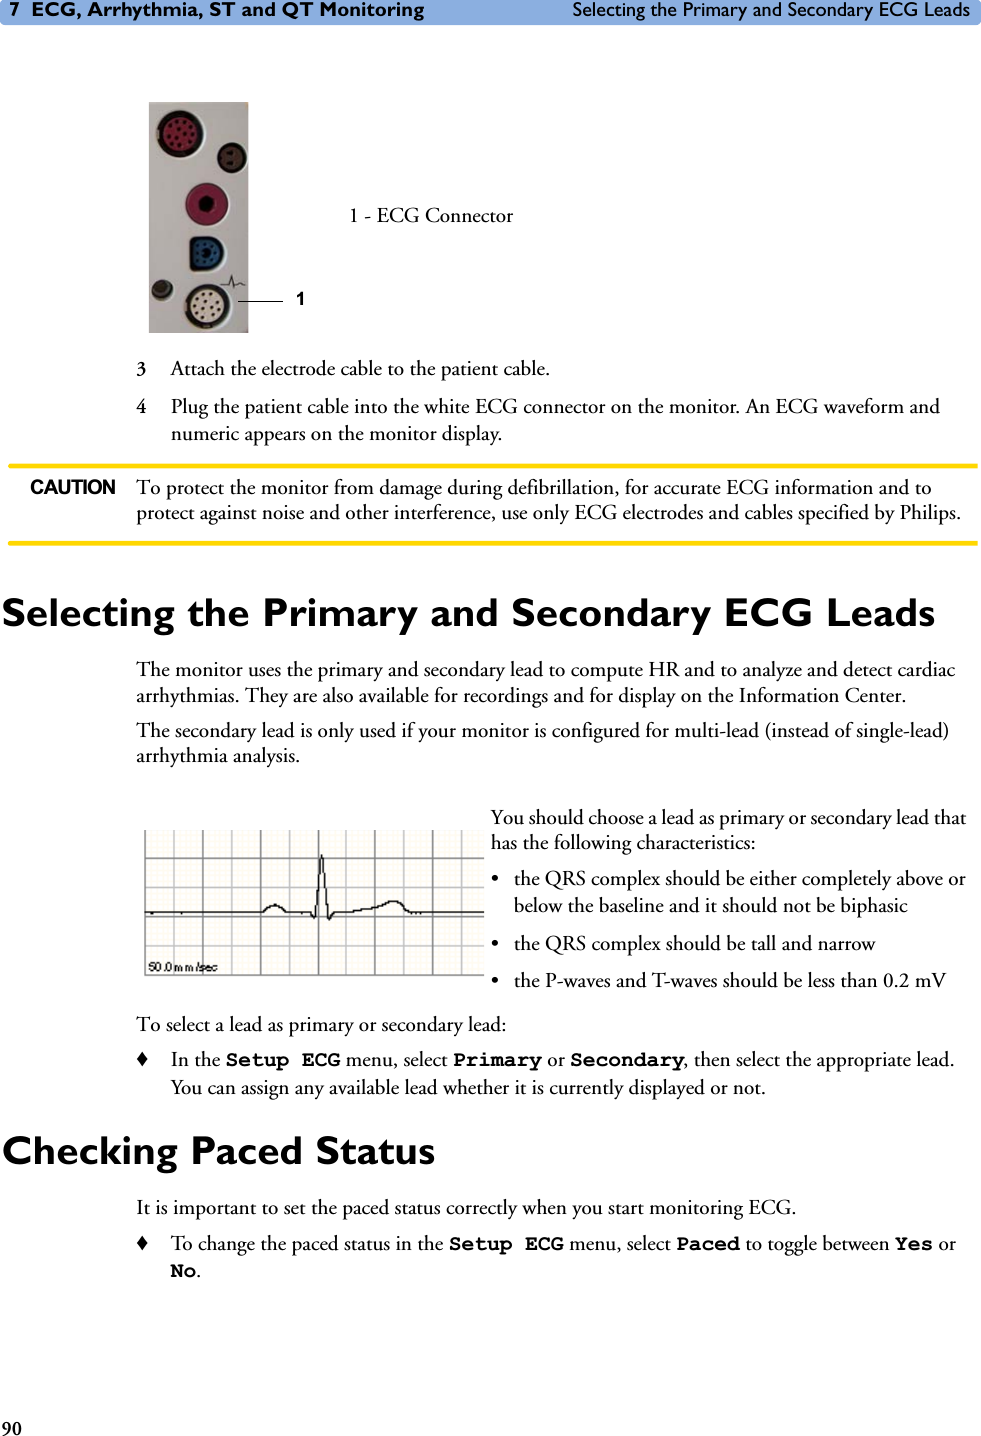 7 ECG, Arrhythmia, ST and QT Monitoring Selecting the Primary and Secondary ECG Leads903Attach the electrode cable to the patient cable.4Plug the patient cable into the white ECG connector on the monitor. An ECG waveform and numeric appears on the monitor display. CAUTION To protect the monitor from damage during defibrillation, for accurate ECG information and to protect against noise and other interference, use only ECG electrodes and cables specified by Philips. Selecting the Primary and Secondary ECG LeadsThe monitor uses the primary and secondary lead to compute HR and to analyze and detect cardiac arrhythmias. They are also available for recordings and for display on the Information Center.The secondary lead is only used if your monitor is configured for multi-lead (instead of single-lead) arrhythmia analysis. To select a lead as primary or secondary lead:♦In the Setup ECG menu, select Primary or Secondary, then select the appropriate lead. You can assign any available lead whether it is currently displayed or not.Checking Paced StatusIt is important to set the paced status correctly when you start monitoring ECG. ♦To change the paced status in the Setup ECG menu, select Paced to toggle between Yes or No.1 - ECG Connector1You should choose a lead as primary or secondary lead that has the following characteristics: • the QRS complex should be either completely above or below the baseline and it should not be biphasic• the QRS complex should be tall and narrow• the P-waves and T-waves should be less than 0.2 mV